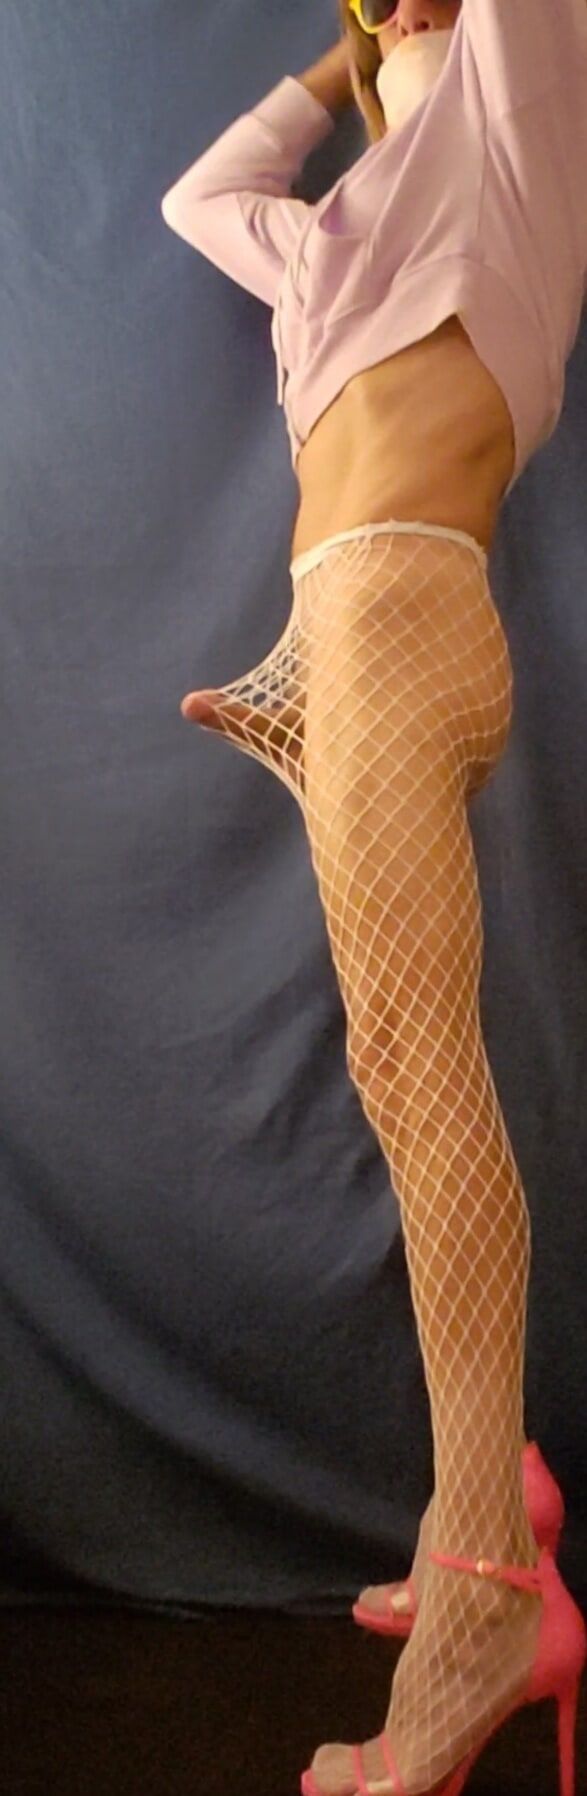 Sexy Sandy in white fishnet stockings #2